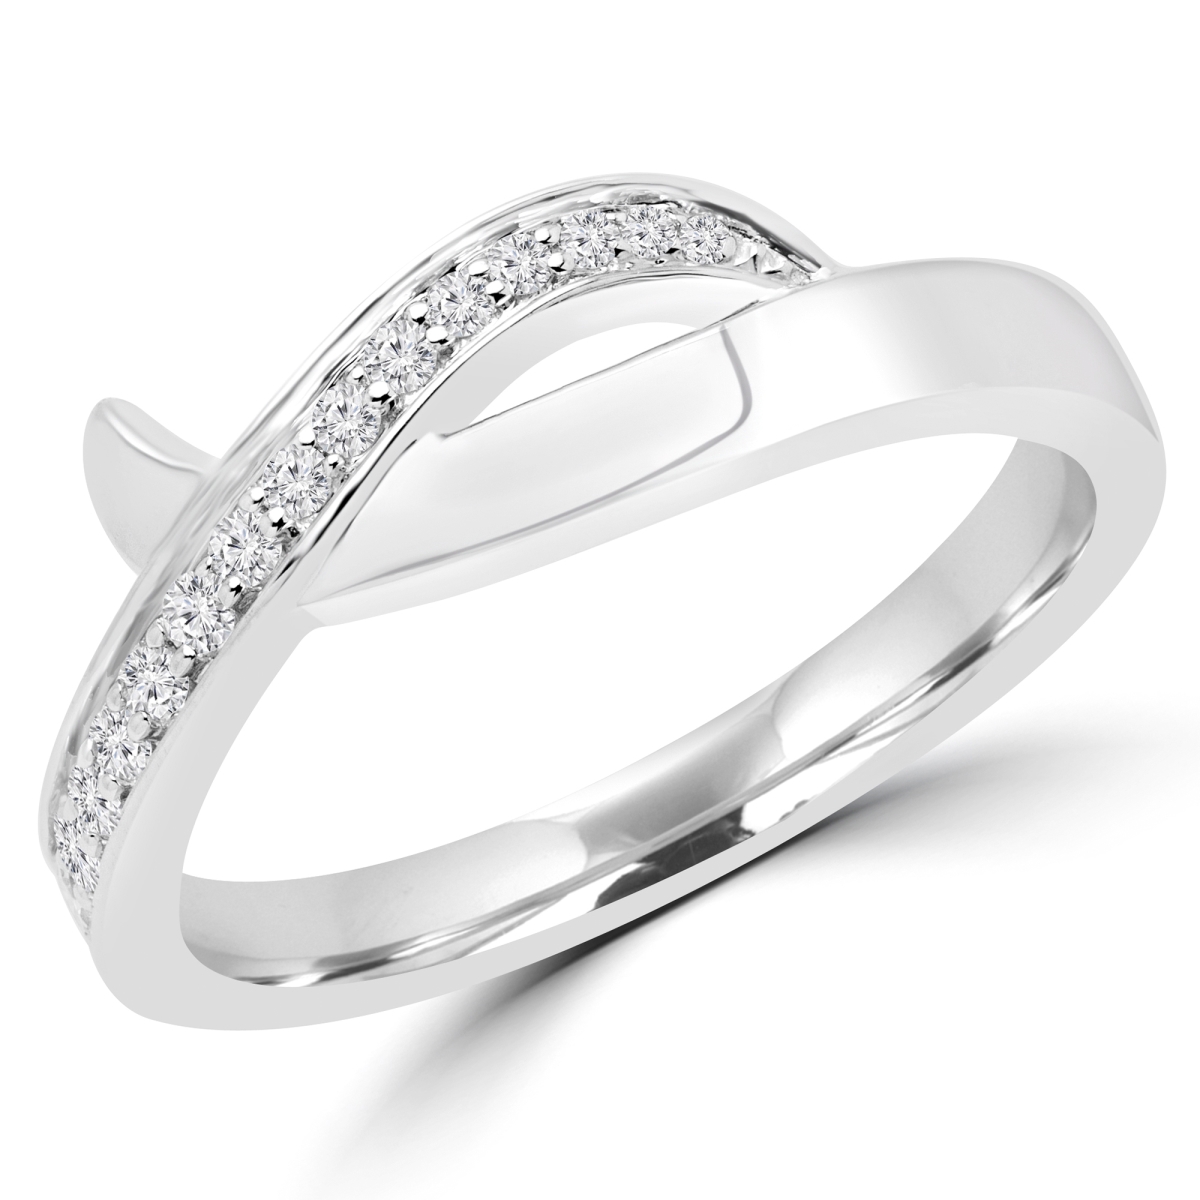 Picture of Majesty Diamonds MDR170054-8.75 0.16 CTW Round Diamond Cocktail Ring in 14K White Gold - 8.75